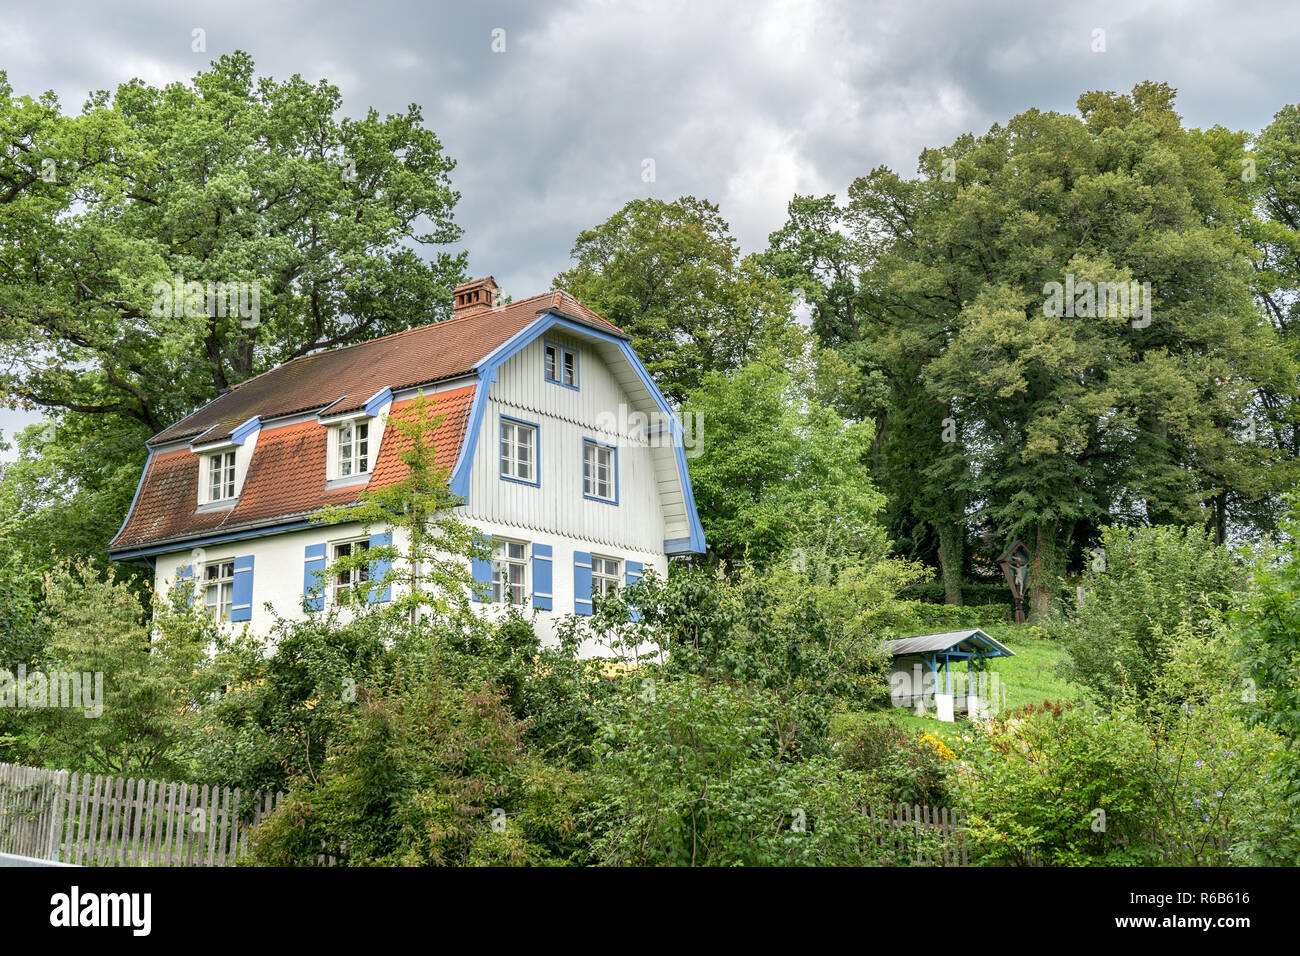 Gabriele MÃ¼nter House with Garden and trees in Murnau Bavaria, Germany Stock Photo